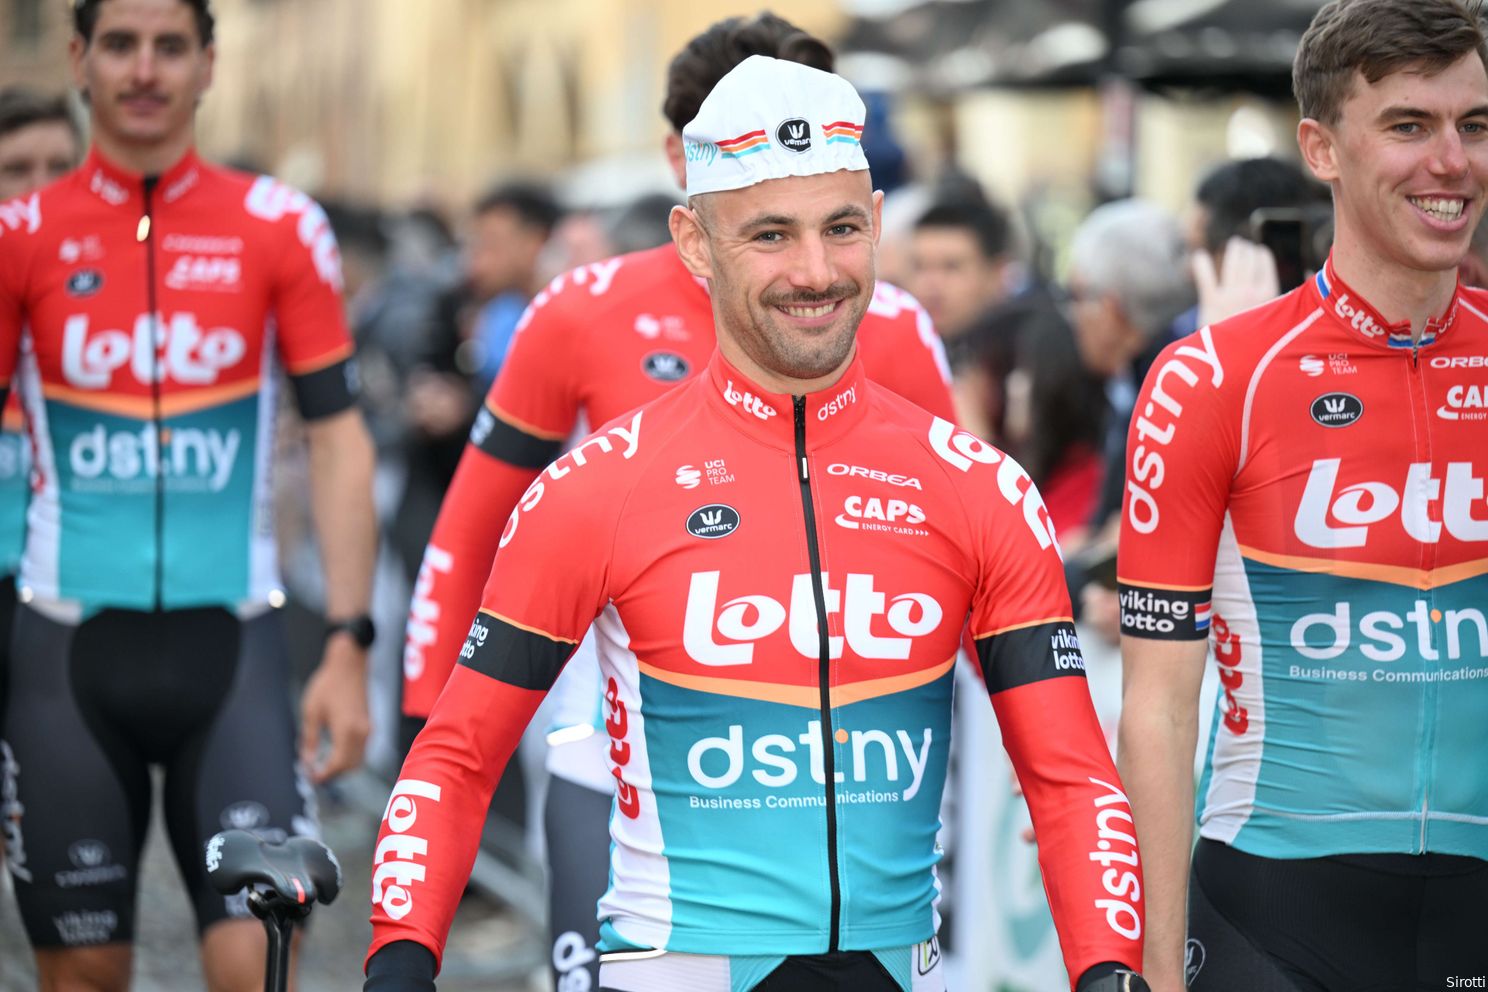 victor campenaerts lotto dstny